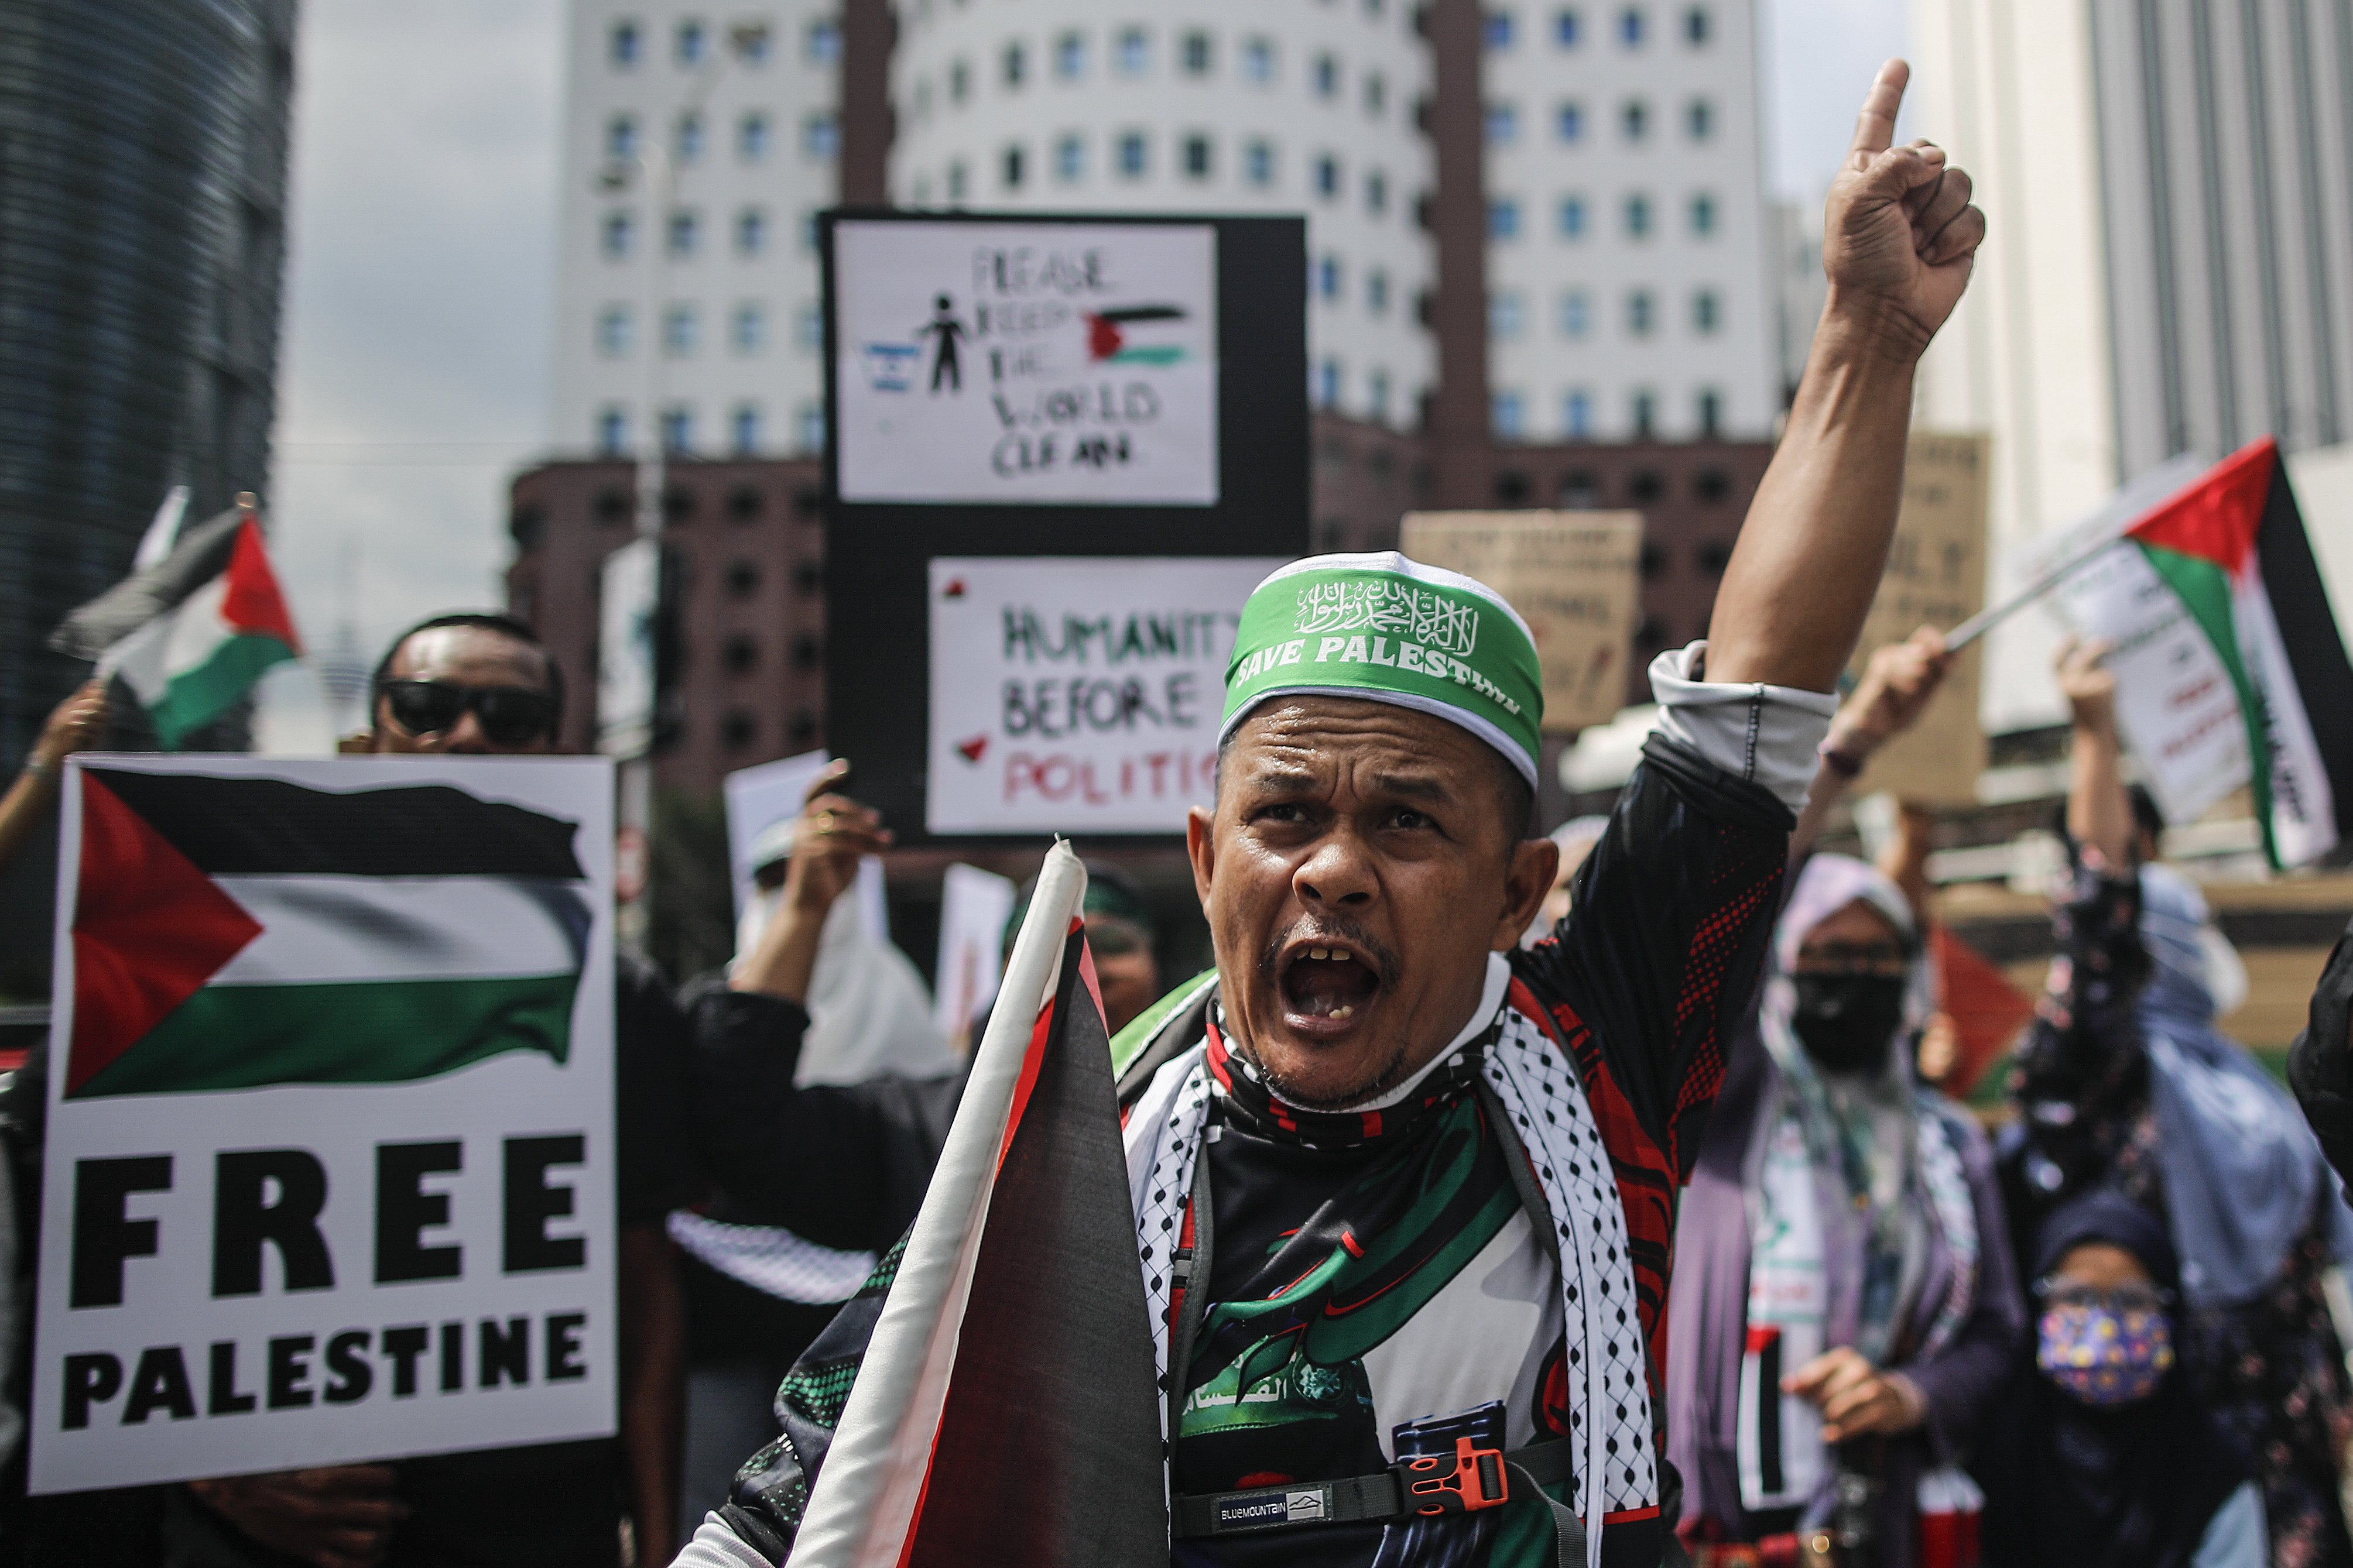 A man yells during a pro-Palestine rally near the US embassy in Kuala Lumpur on December 22, 2023. Religious authorities in Malaysia and Indonesia have called on Muslims to boycott Israel and companies that support Israel. Photo: EPA-EFE